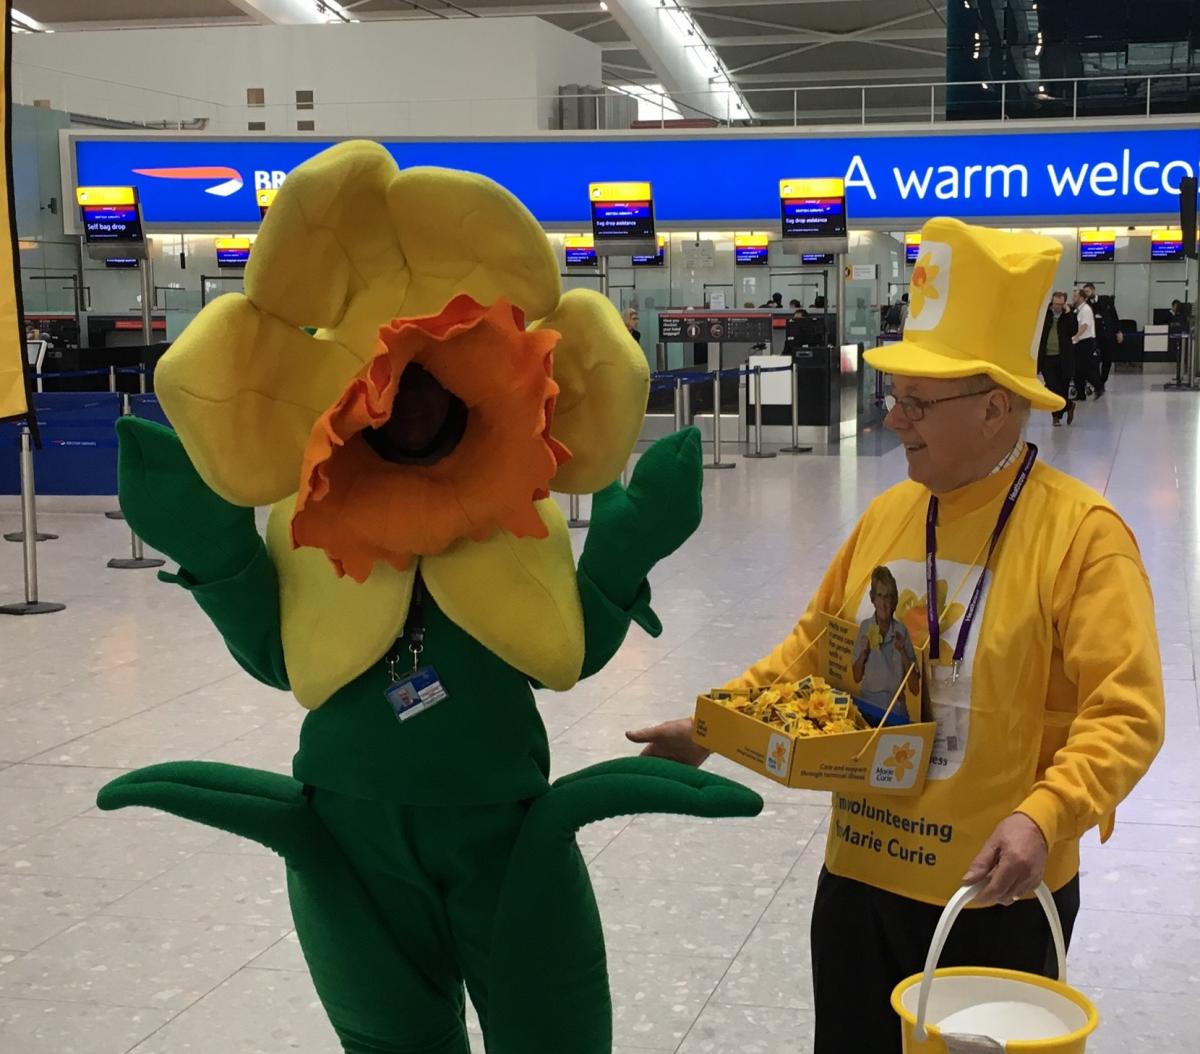 Marie Curie Collection at Heathrow T5 March 2017 - What did you say?